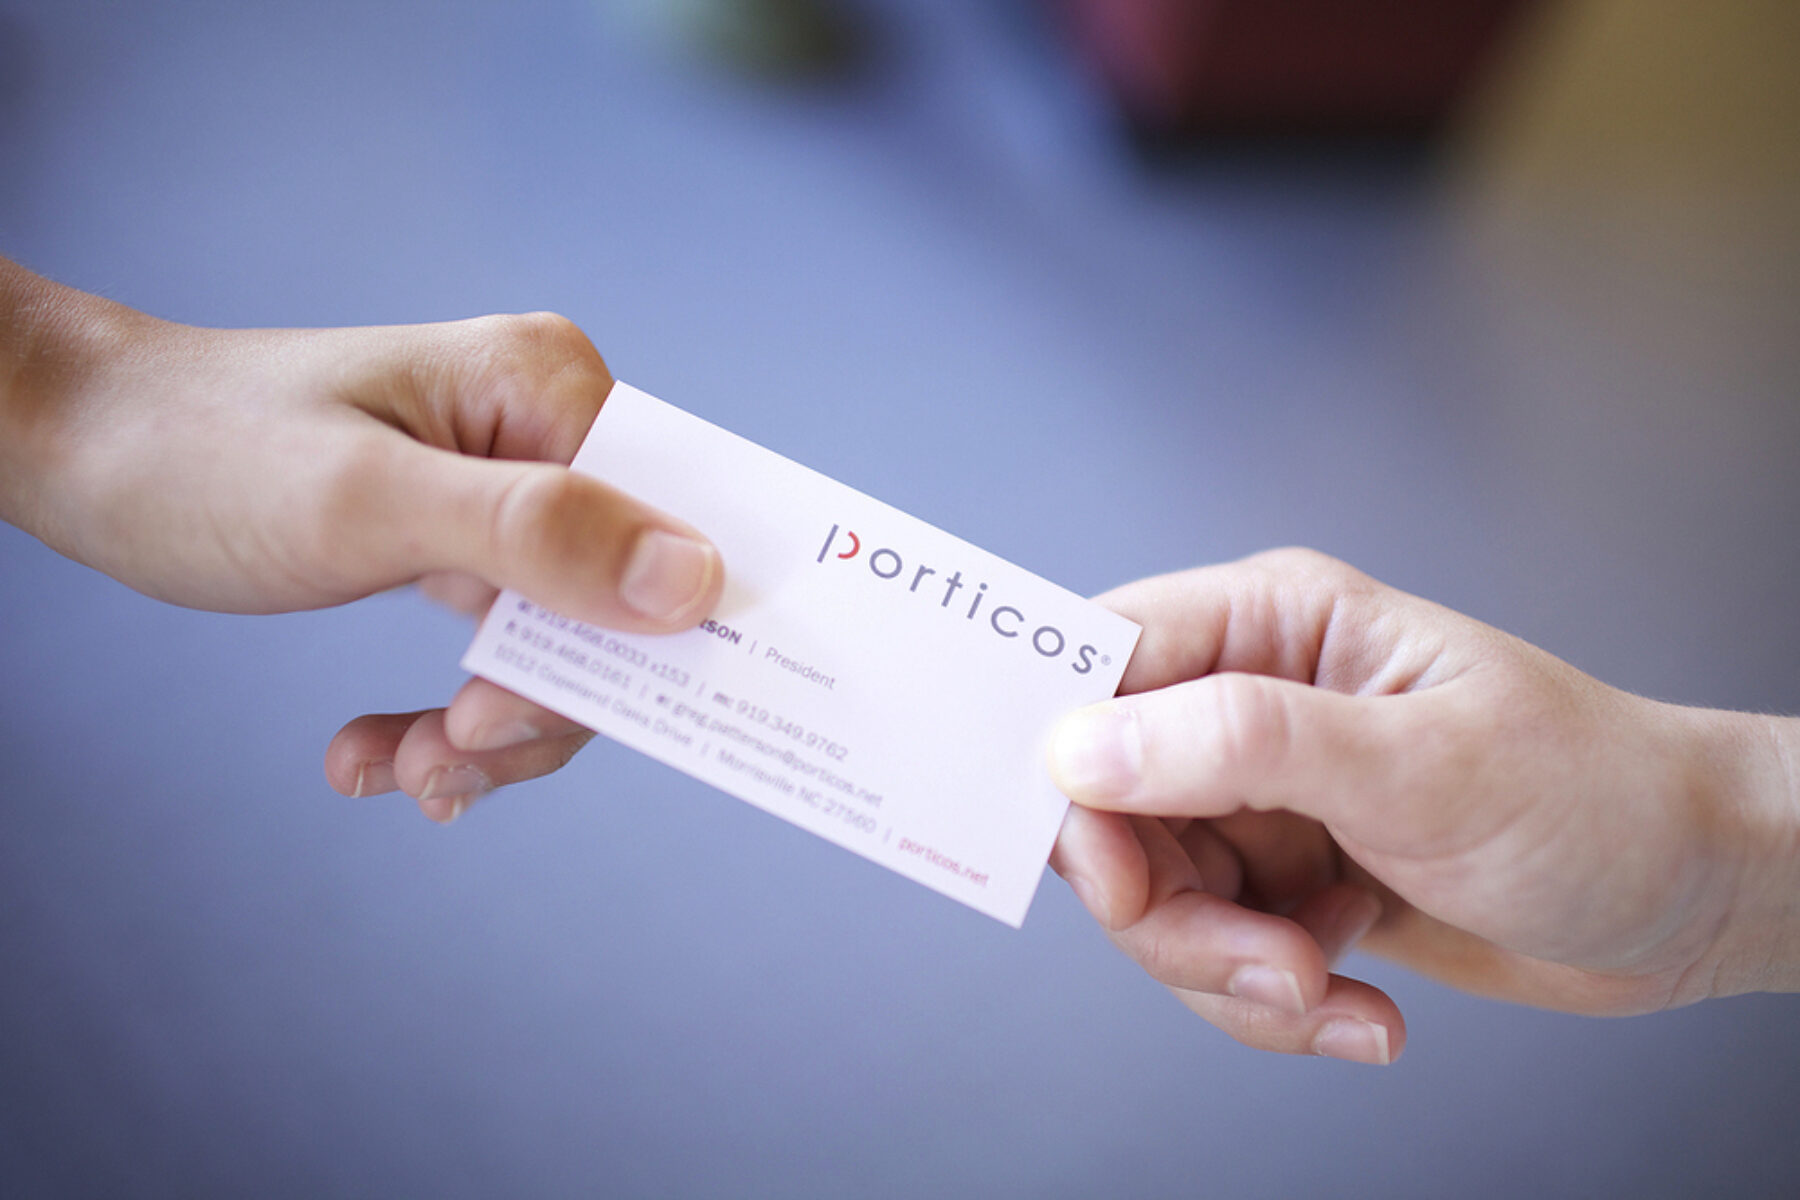 Two people exchanging a Porticos business card